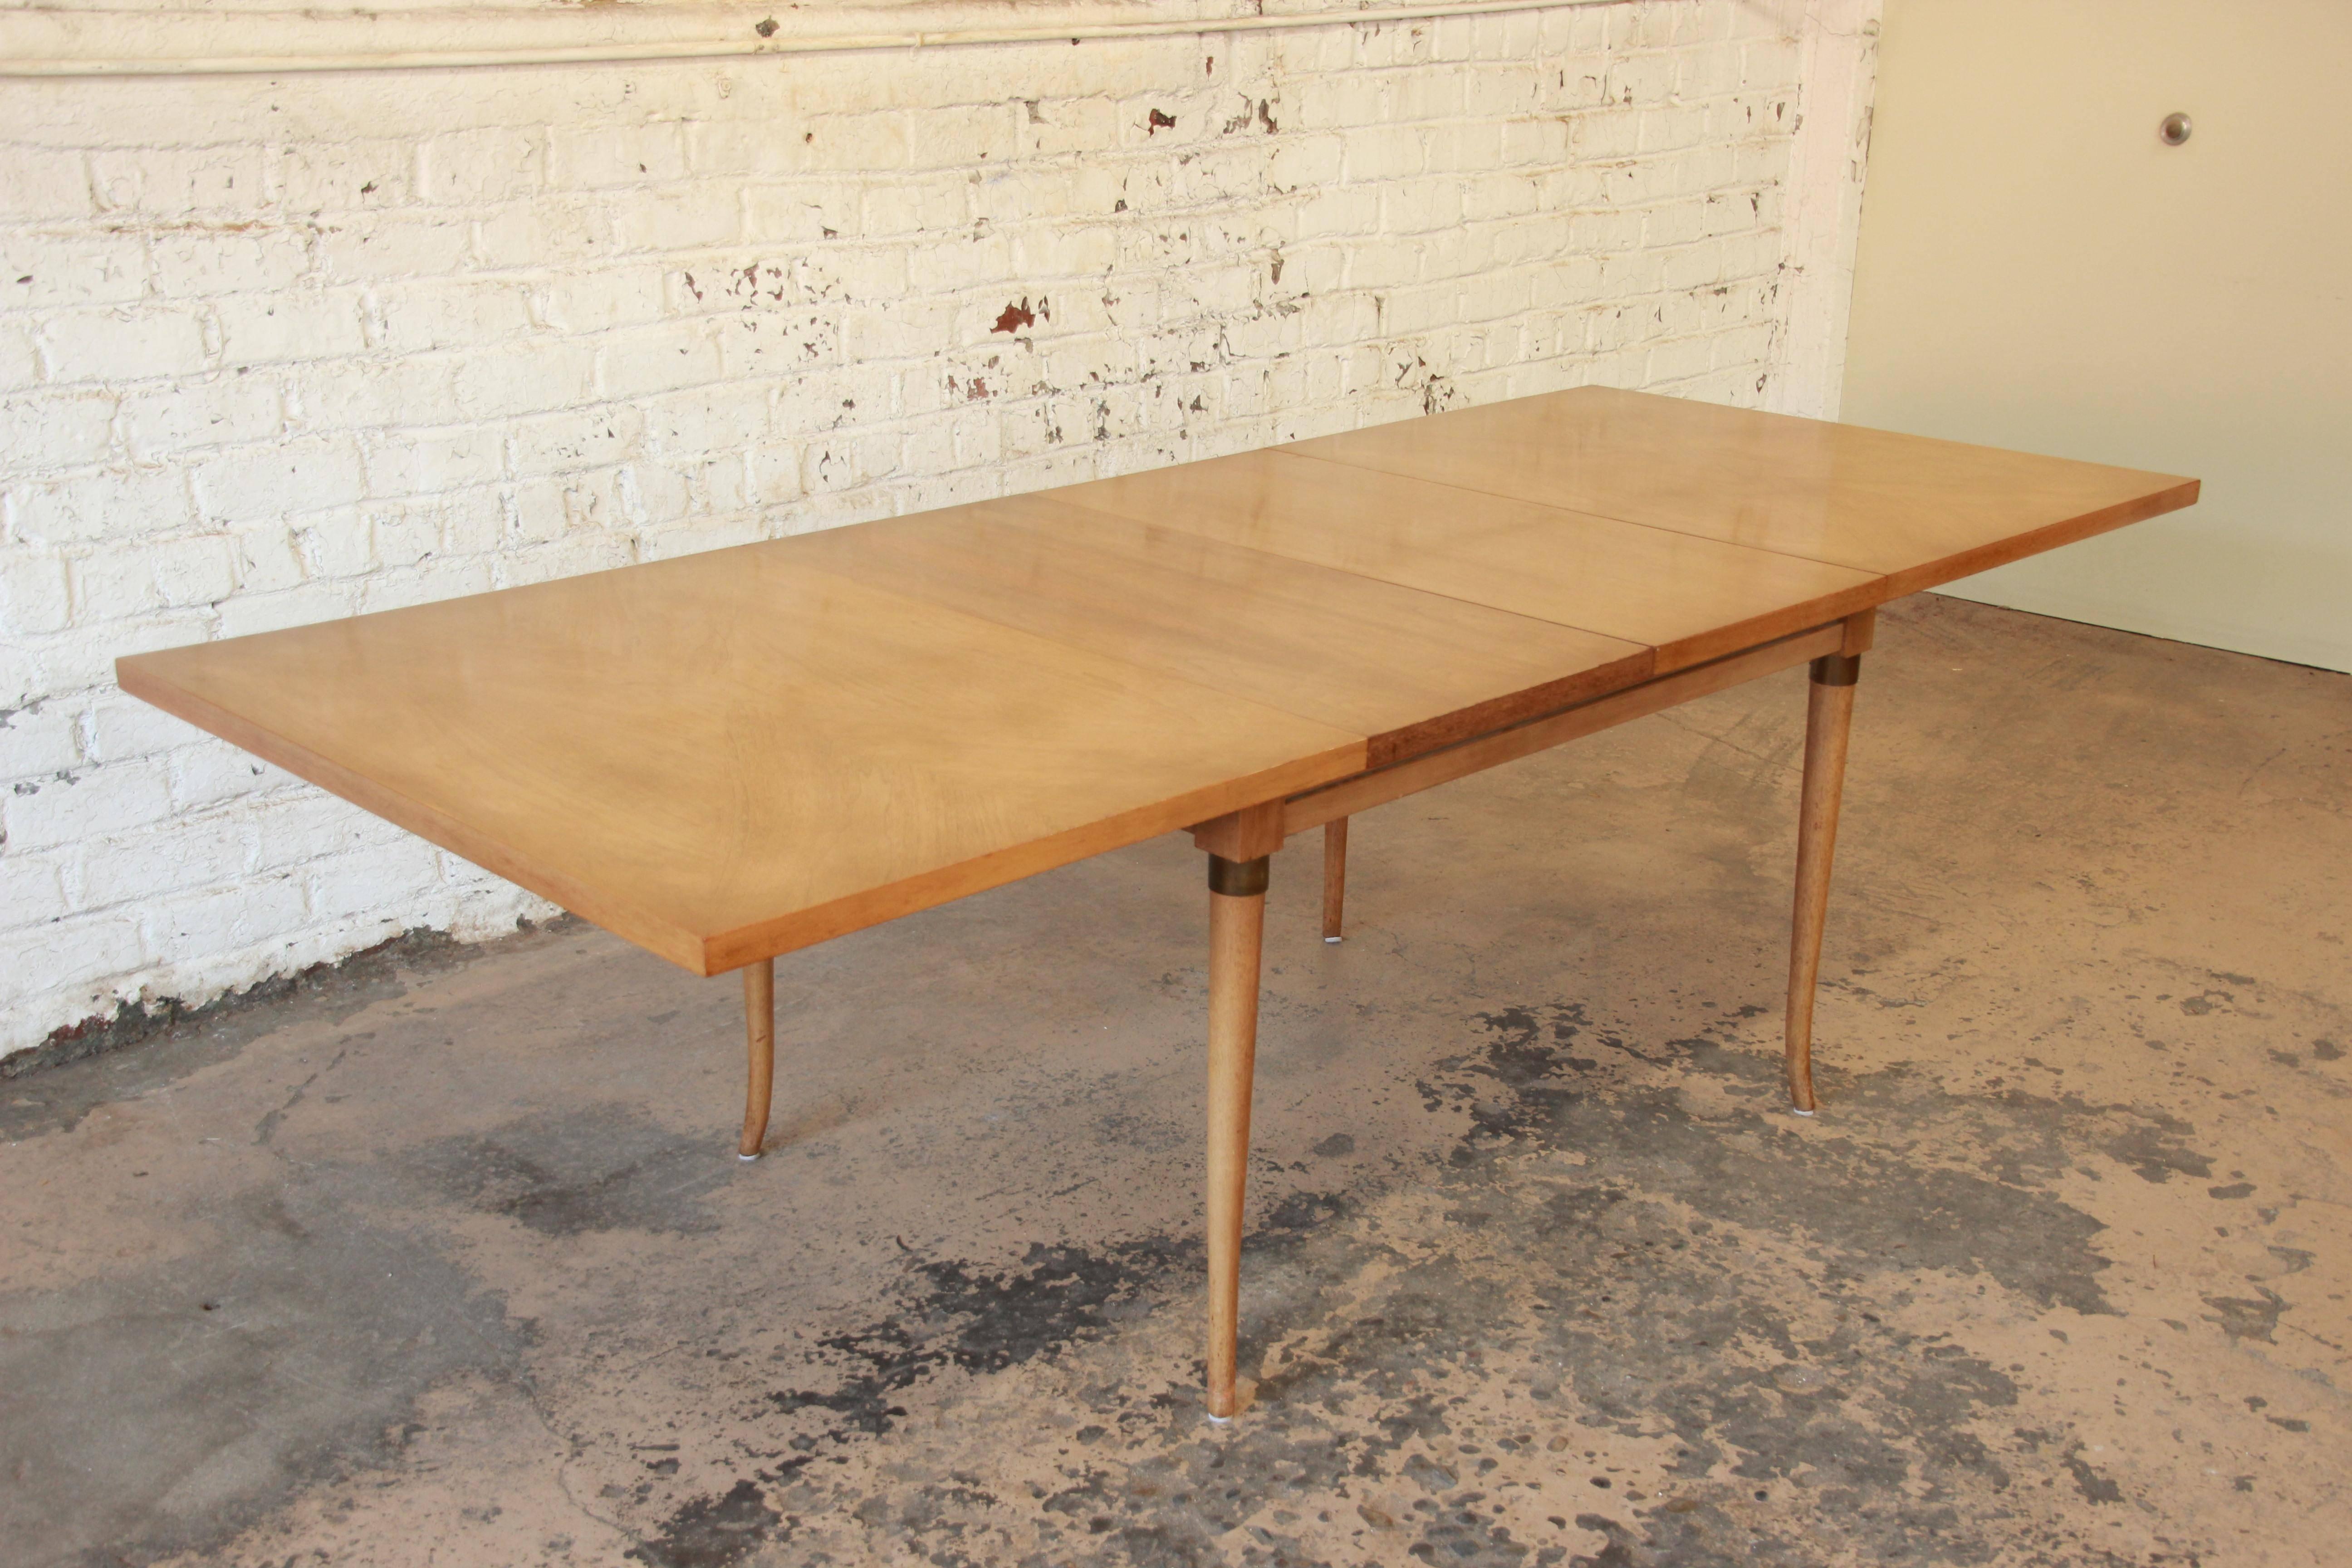 A beautiful Mid-Century Modern bleached walnut extension dining table designed by Merton Gershun for American of Martinsville, circa 1960s. The table features beautiful wood grain, nice brass details, and a sturdy 1.5